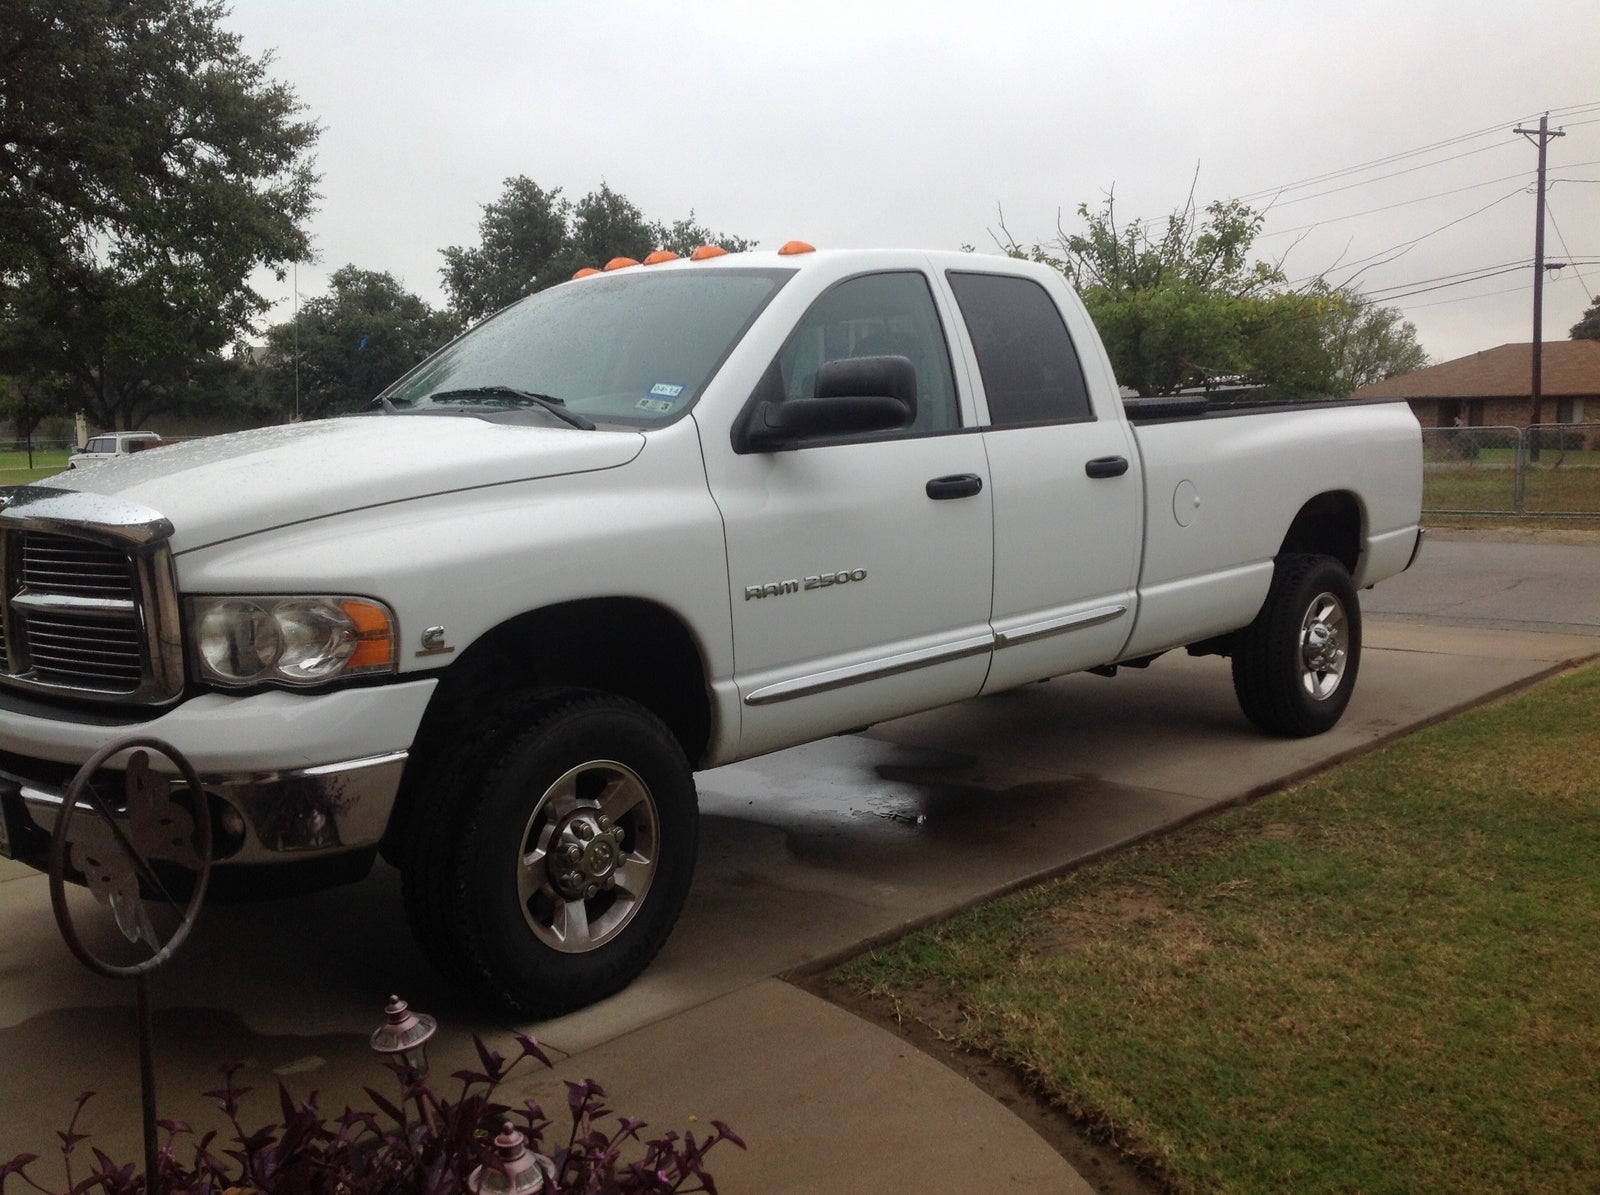 Oil And Gas Stock Prices: Gas Mileage On Dodge Ram 1500 Hemi 5.7 2005 Dodge Ram 1500 Hemi Gas Mileage